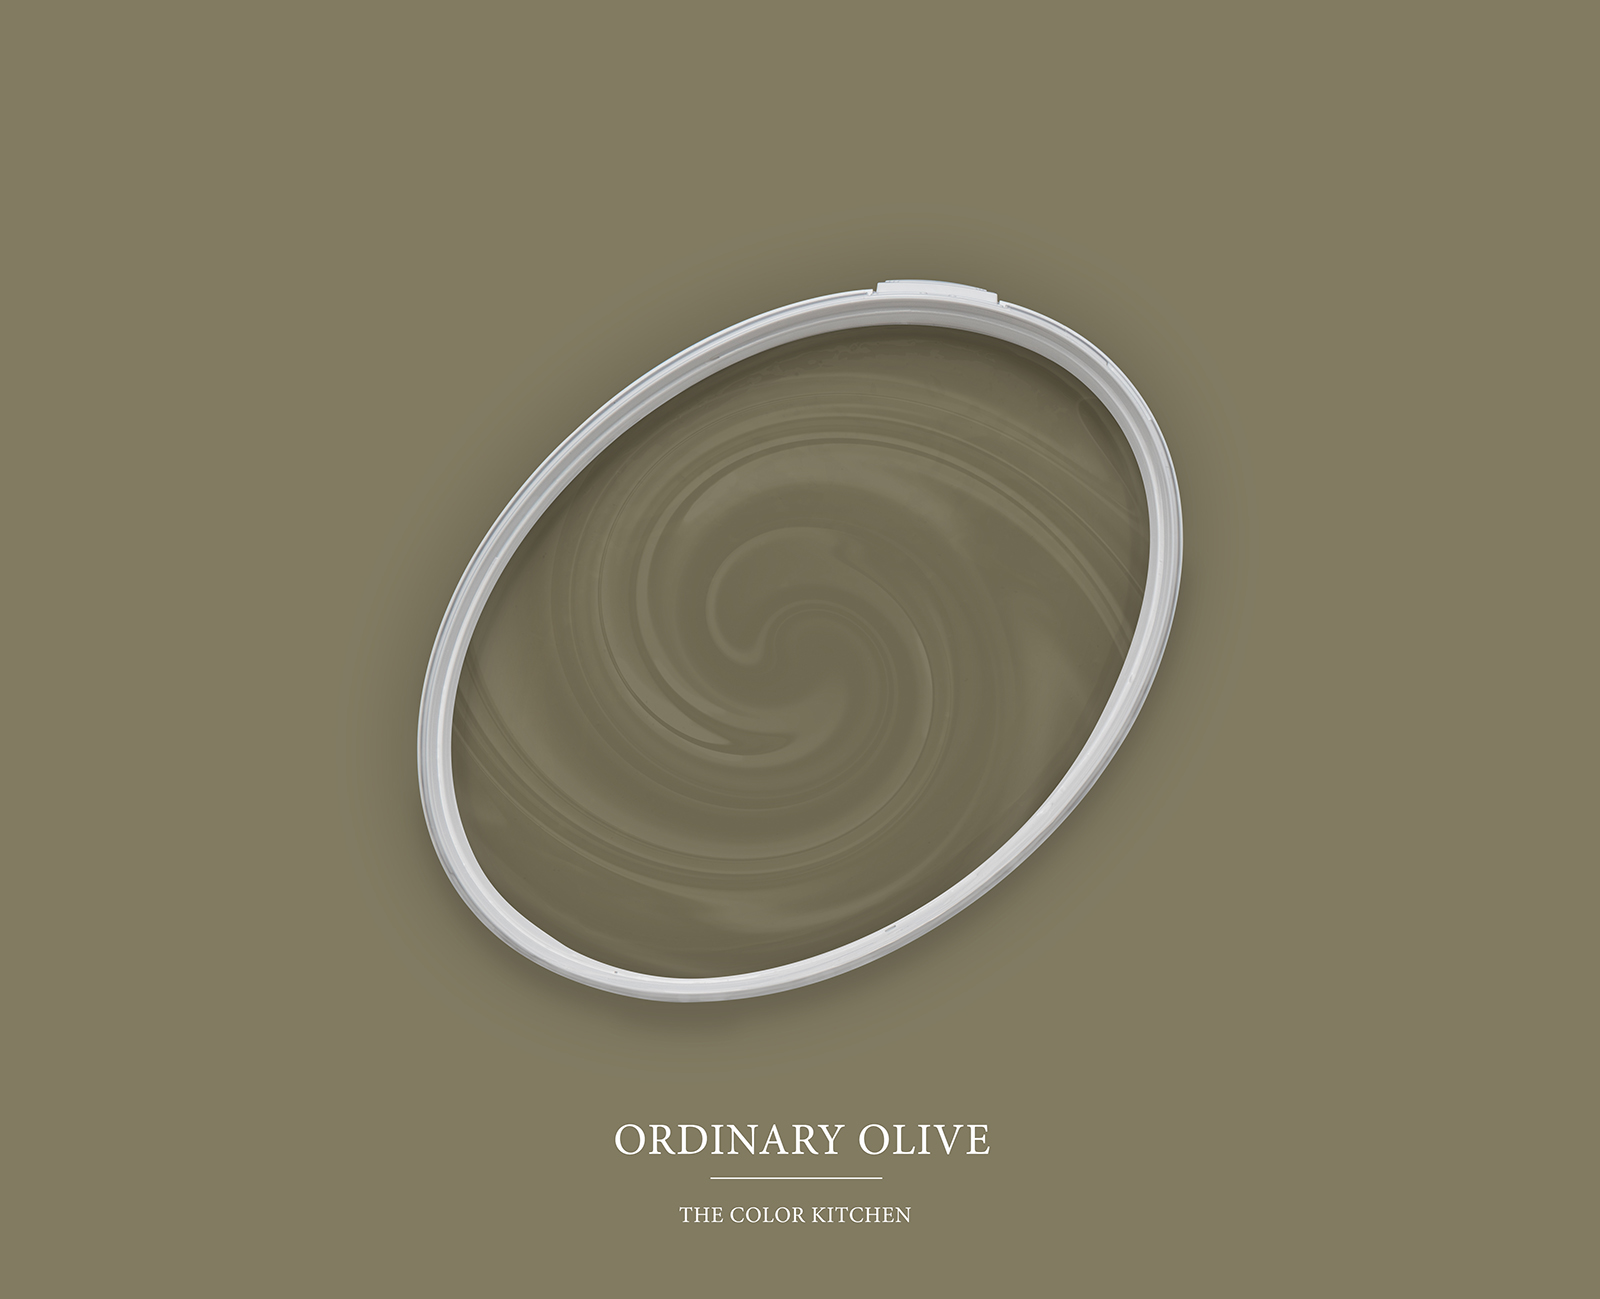         Wall Paint TCK4013 »Ordinary Olive« in intensive olive tone – 2.5 litre
    